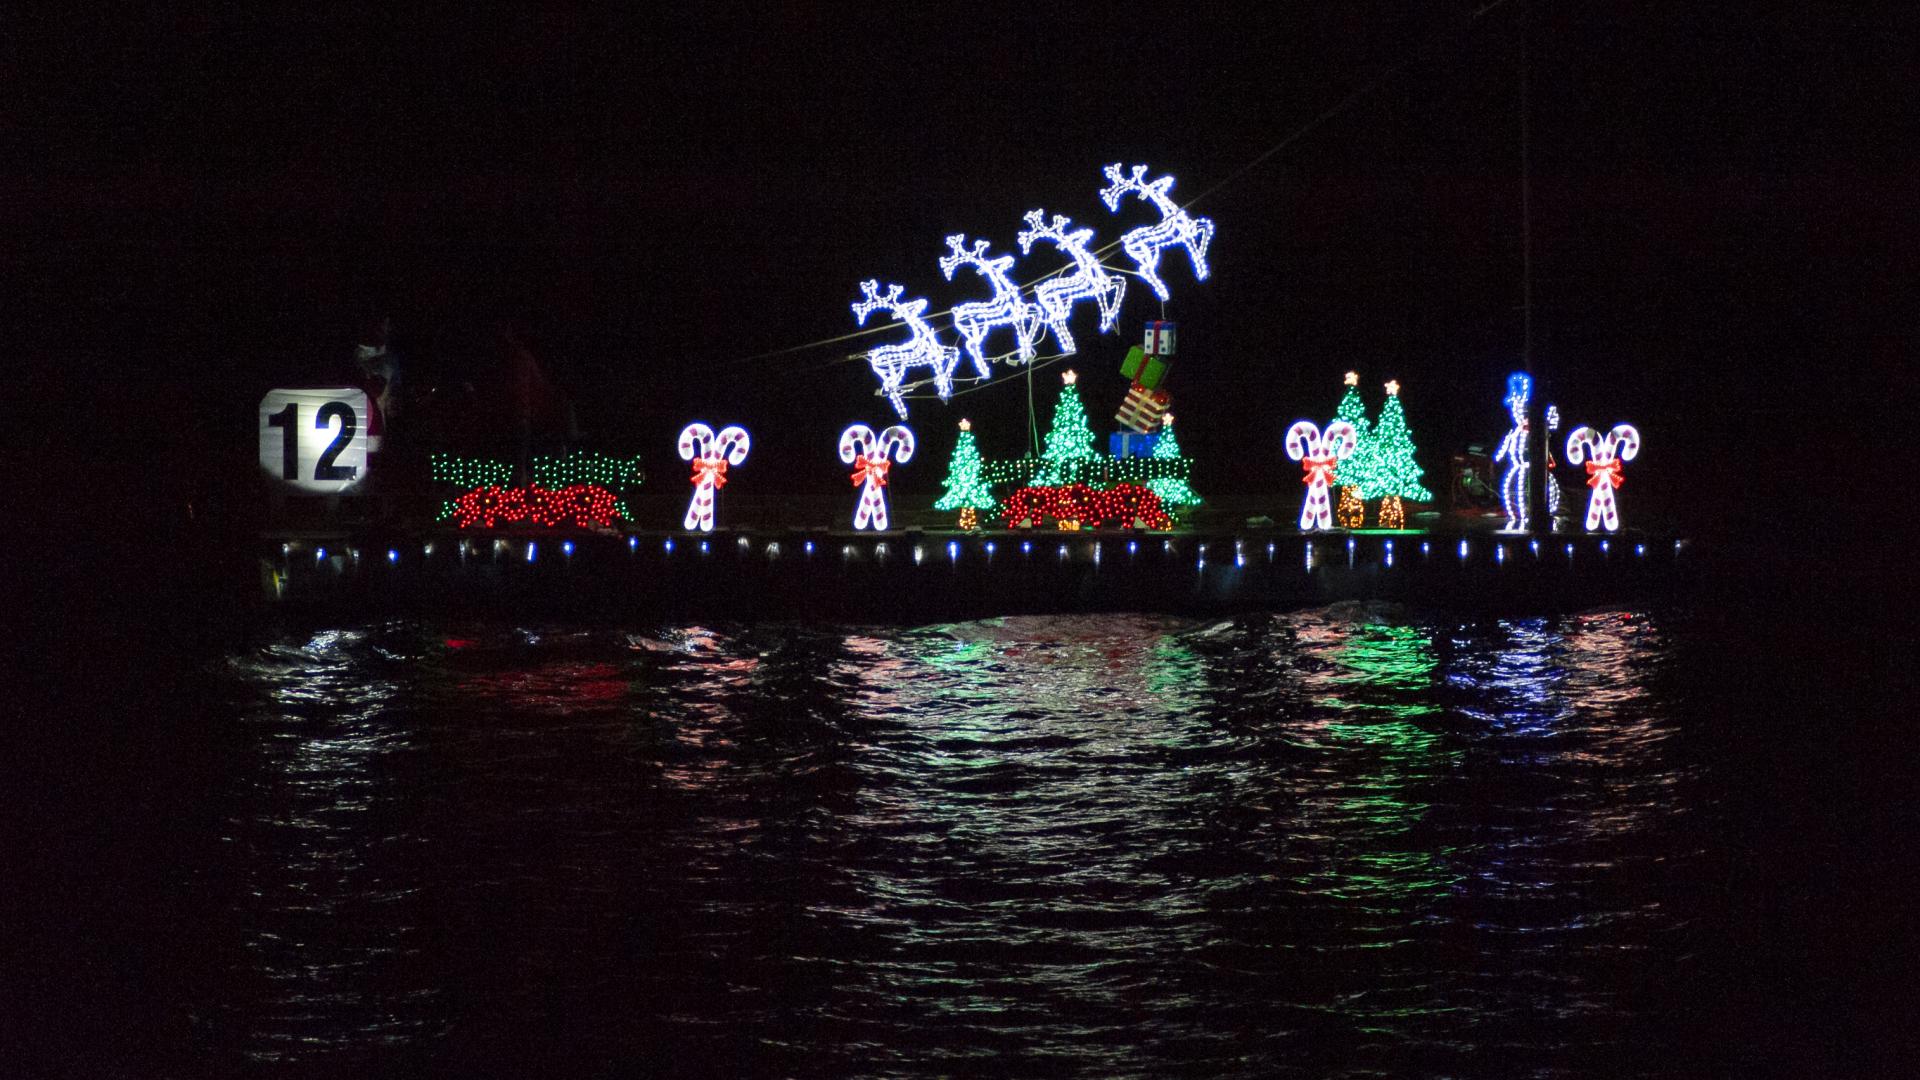 Lights on the Harbor: A Boat Parade Watch Party showing a boat with lit up holiday decorations